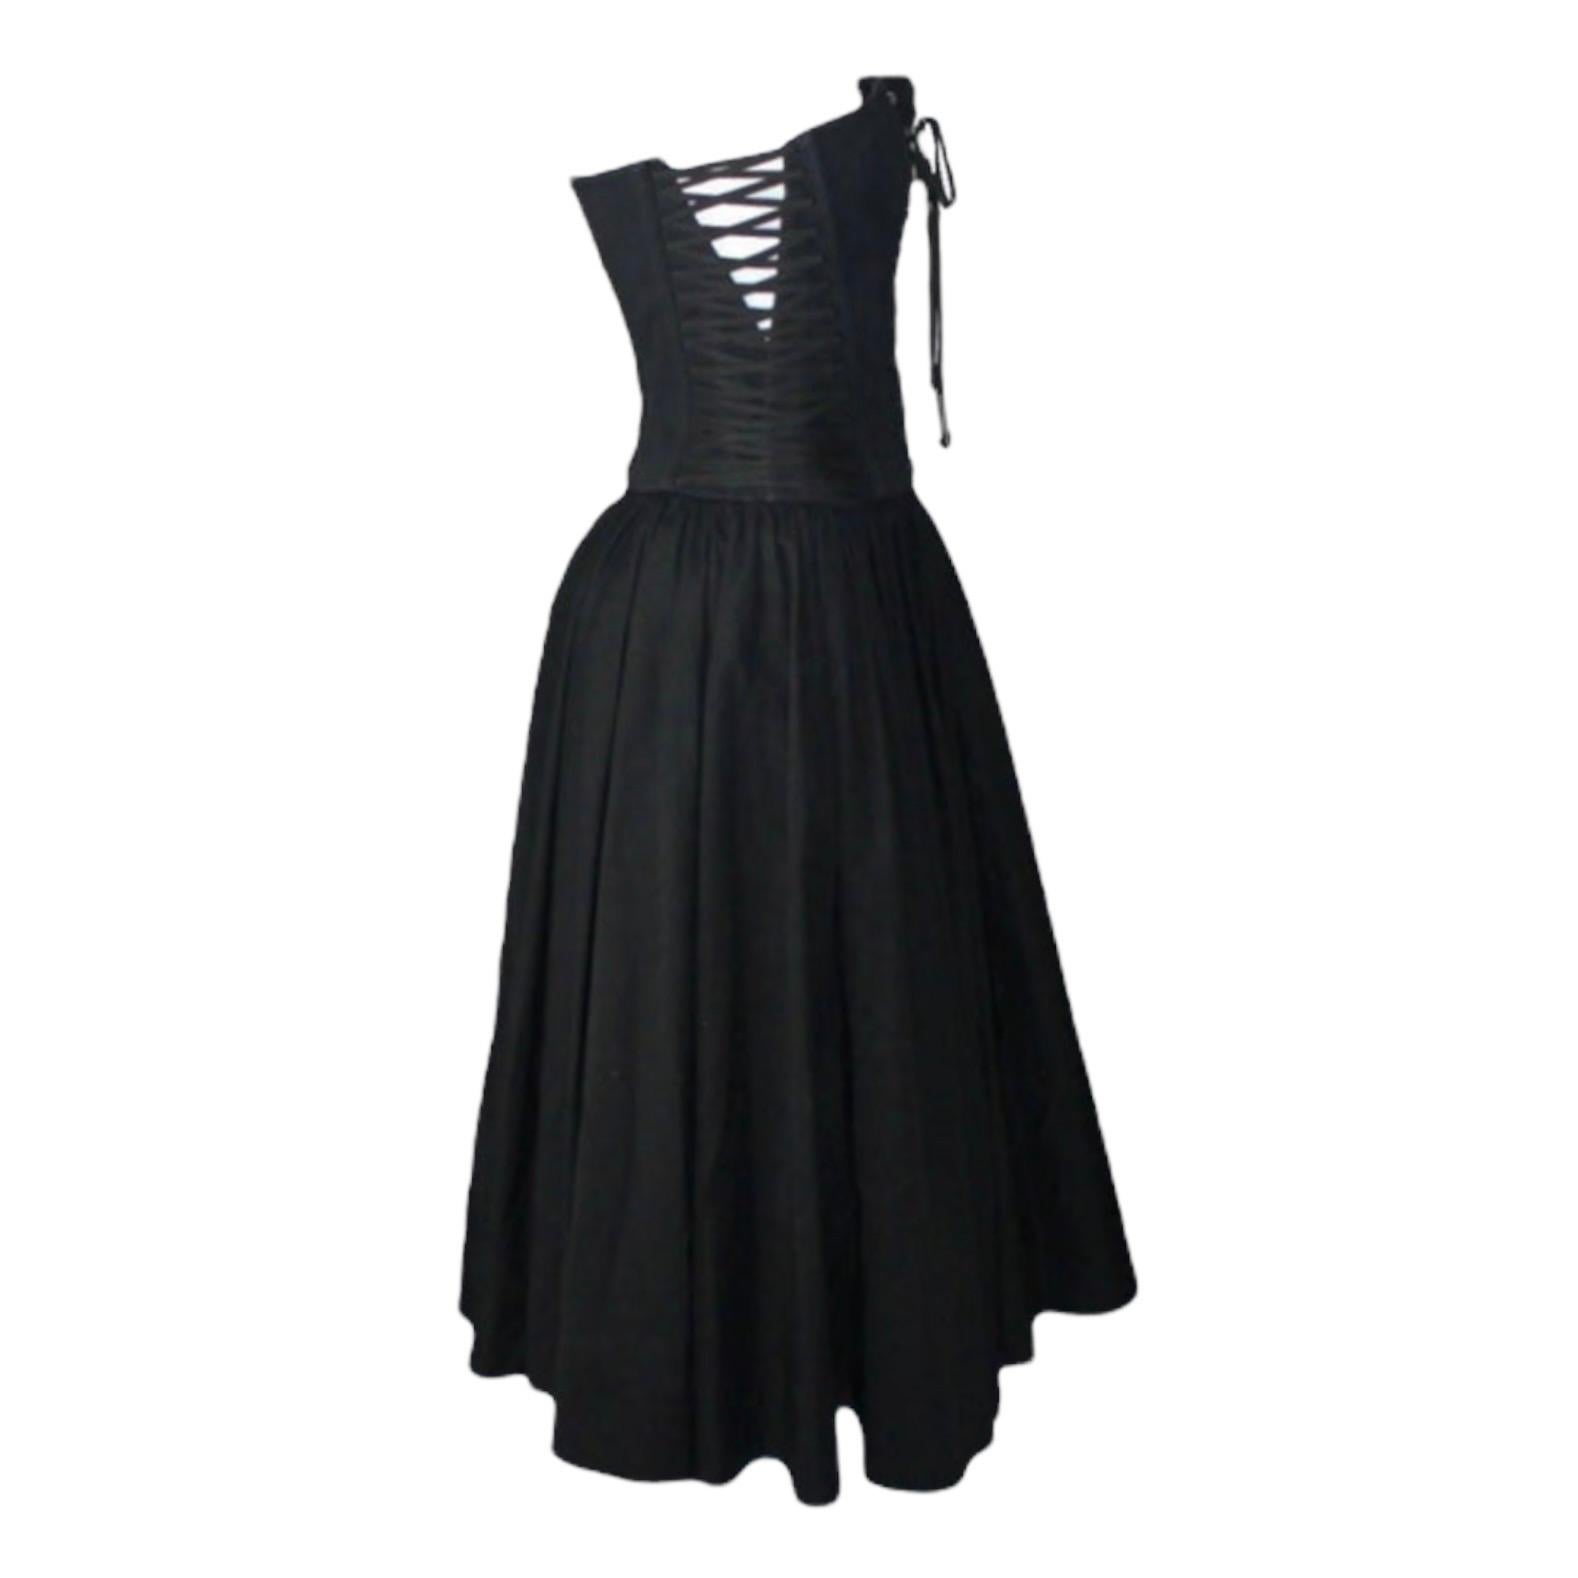 Timeless black dress by Dolce & Gabbana
Stunning corset part with lace up detail in front and on sides
Corset fully boned, can be adjusted with lace up for a perfect fit
Closes with hidden zip on side
Gathered skirt part
Lace up details
Bra not